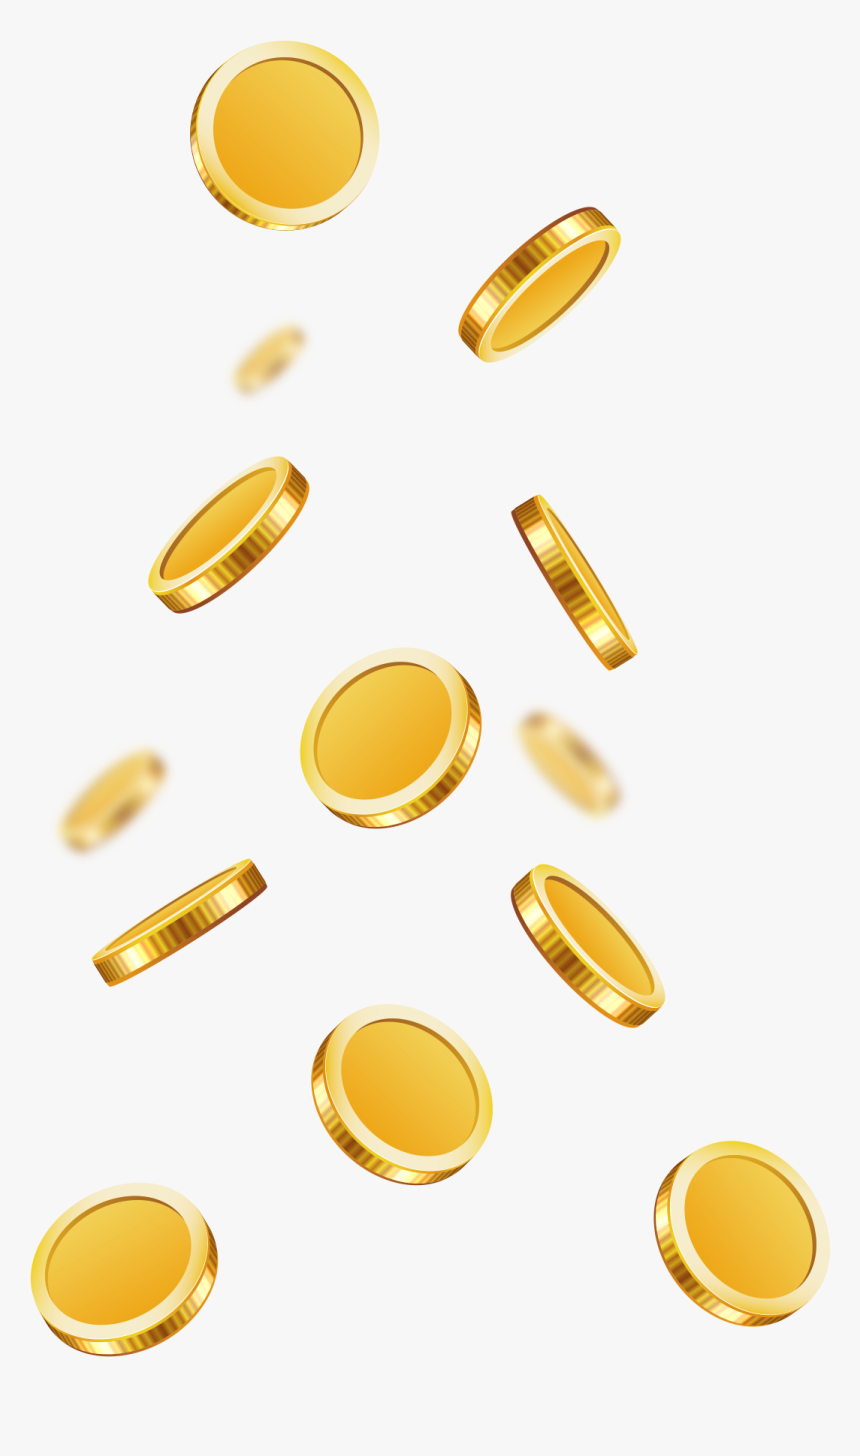 Raining Coins Png, Transparent Png, Free Download